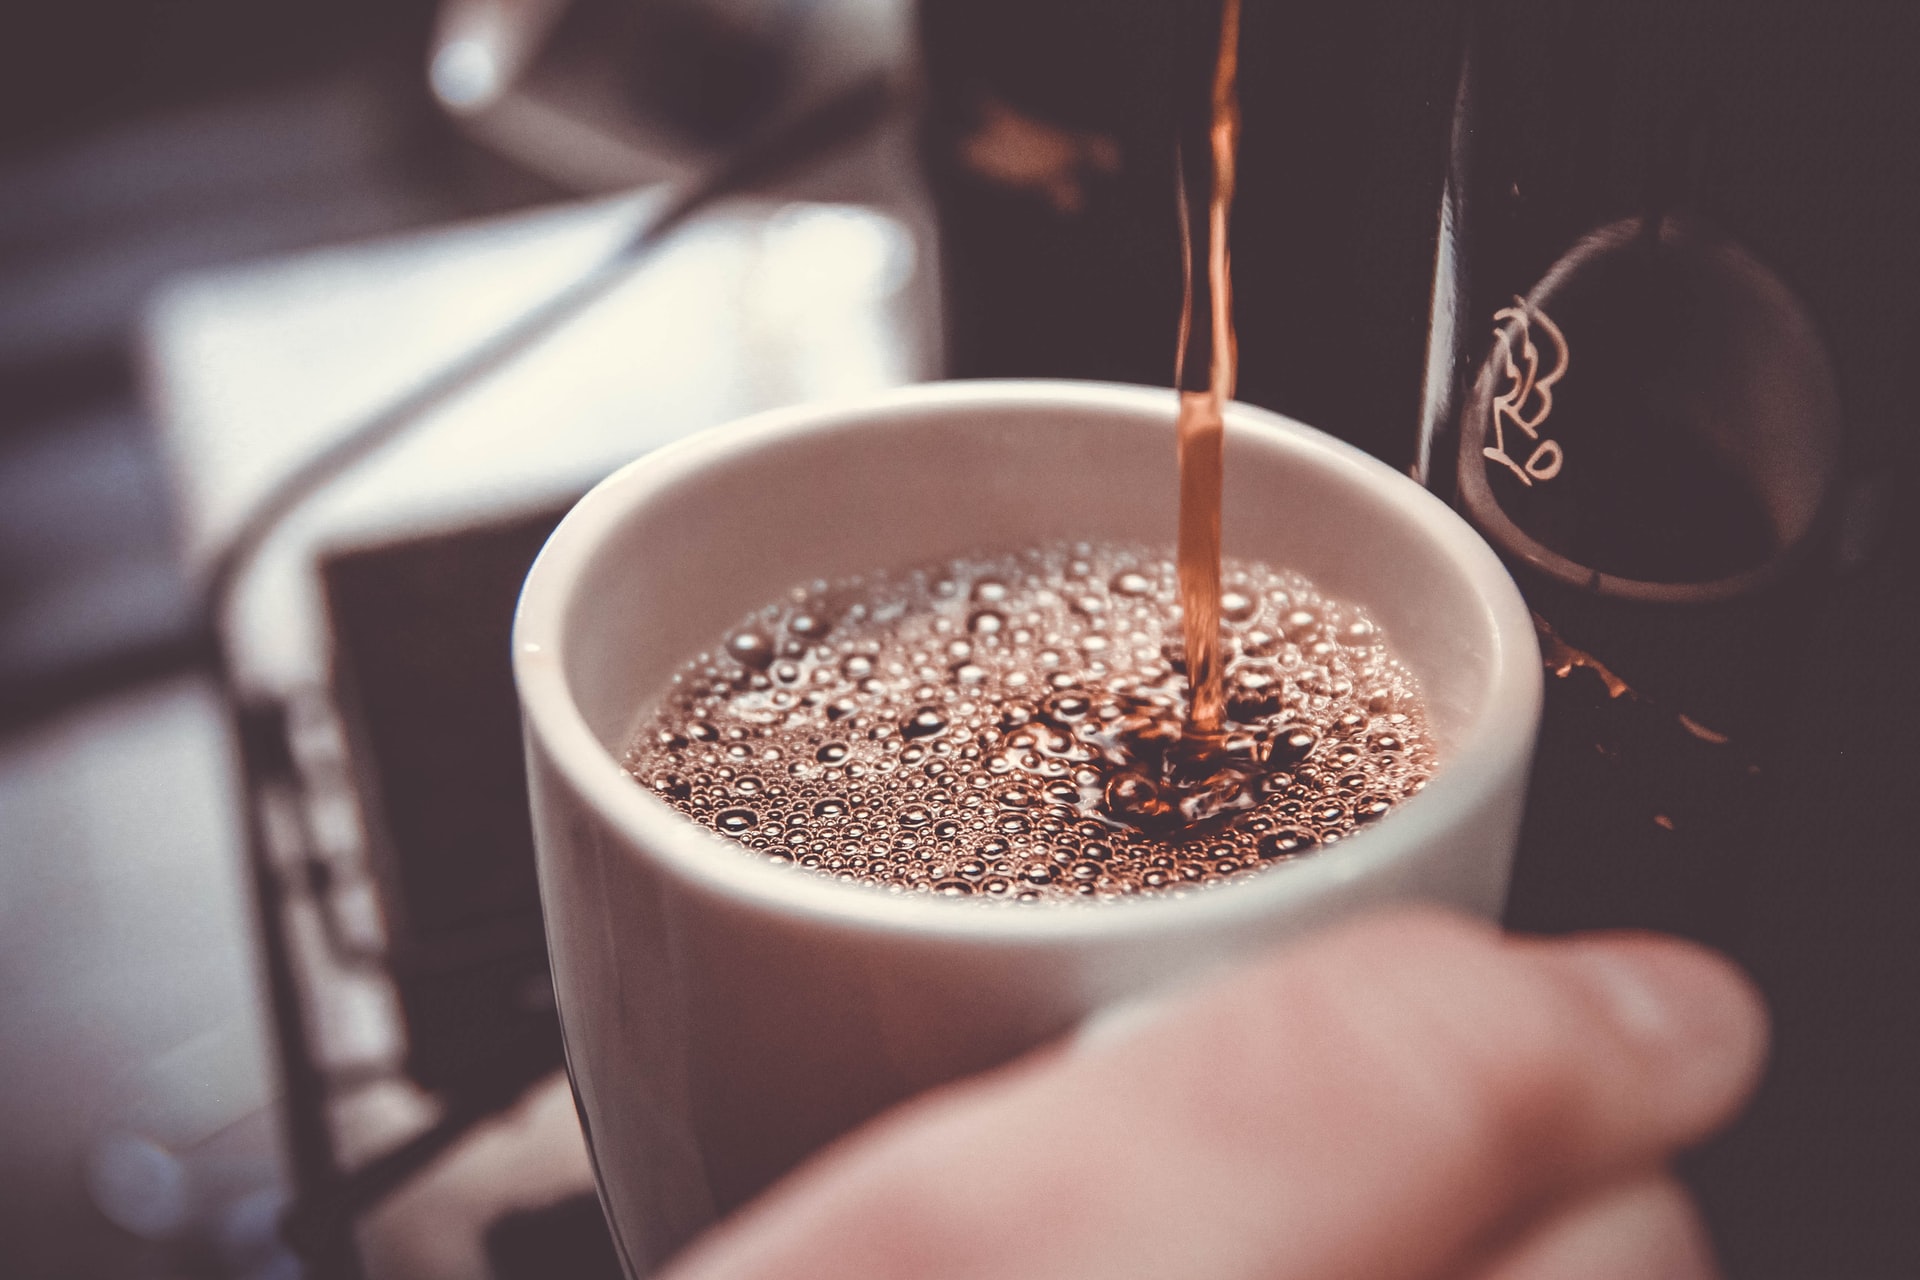 For consumption on the road, for example at a coffee shop, a reusable alternative must be offered. These businesses can do this in the form of a return system, or by letting consumers bring their own cup or container.